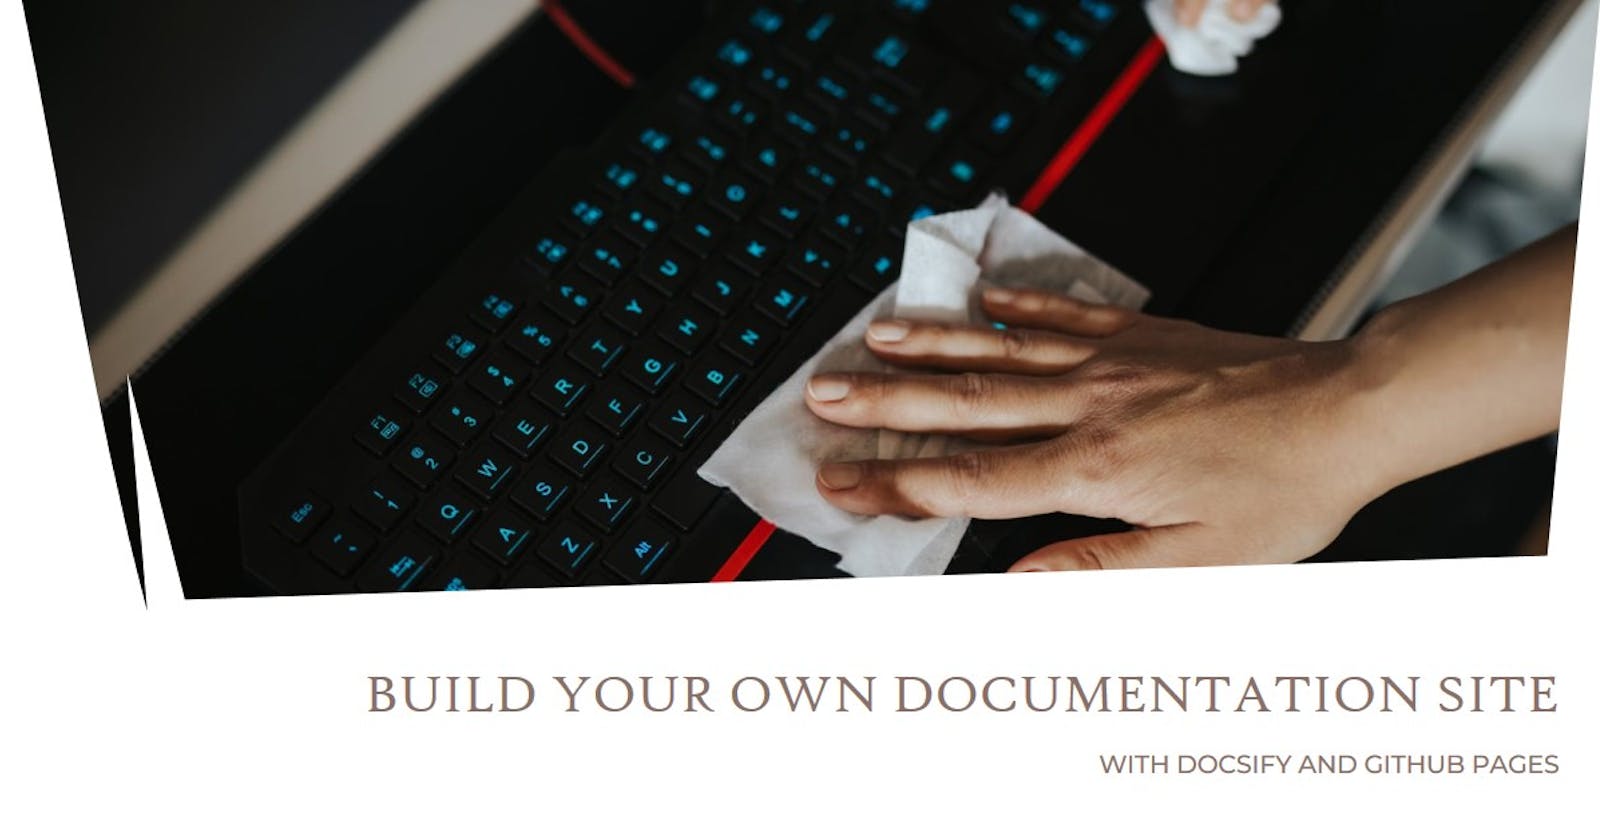 How To Build a Documentation Site with Docsify and GitHub Pages